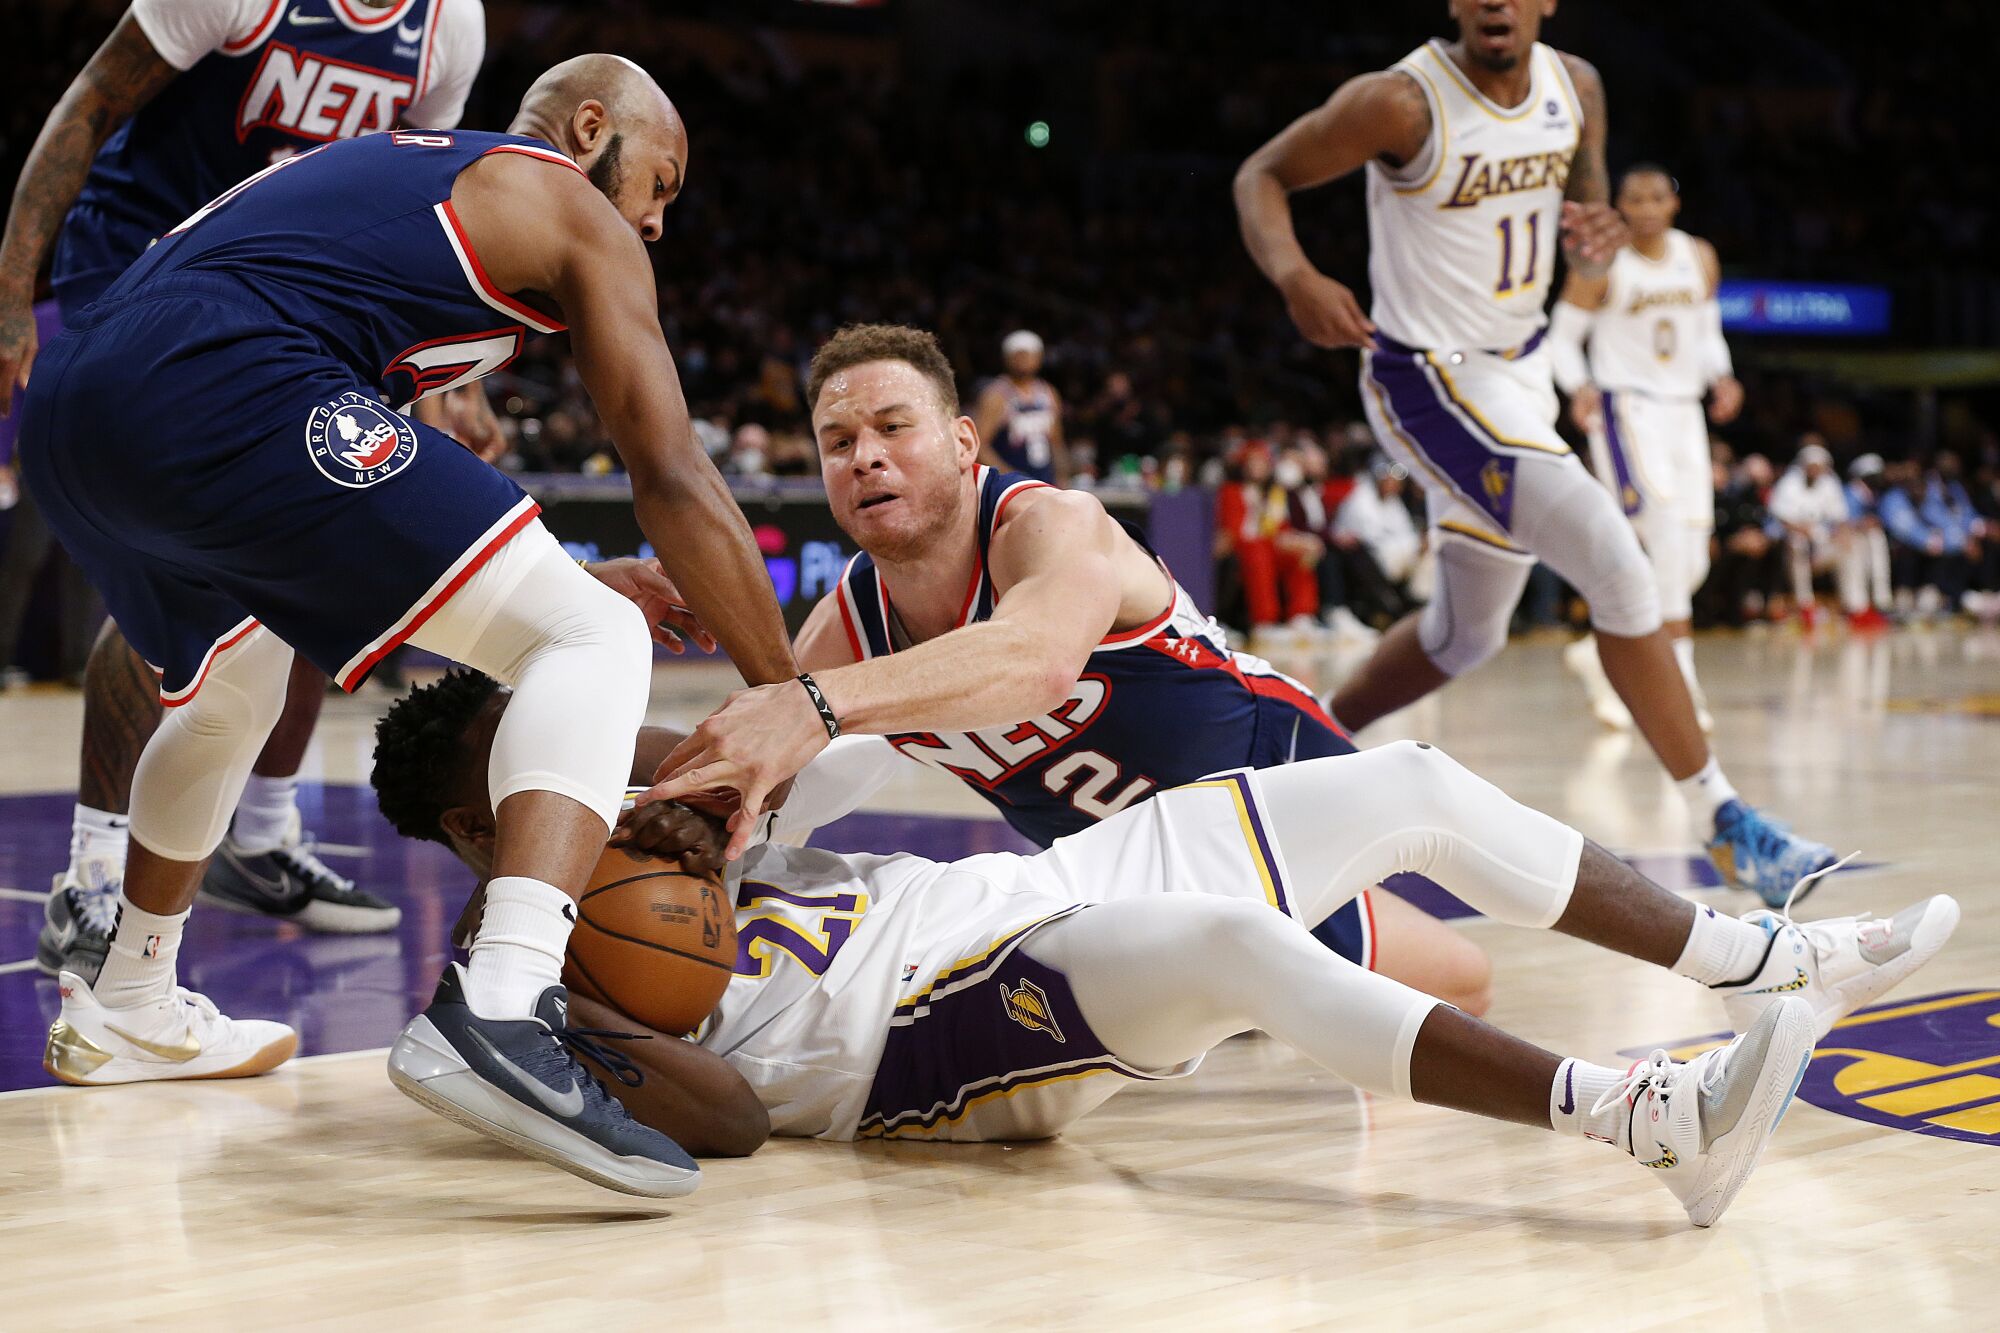 Lakers guard Darren Collison fights for a loose ball with the Brooklyn Nets.